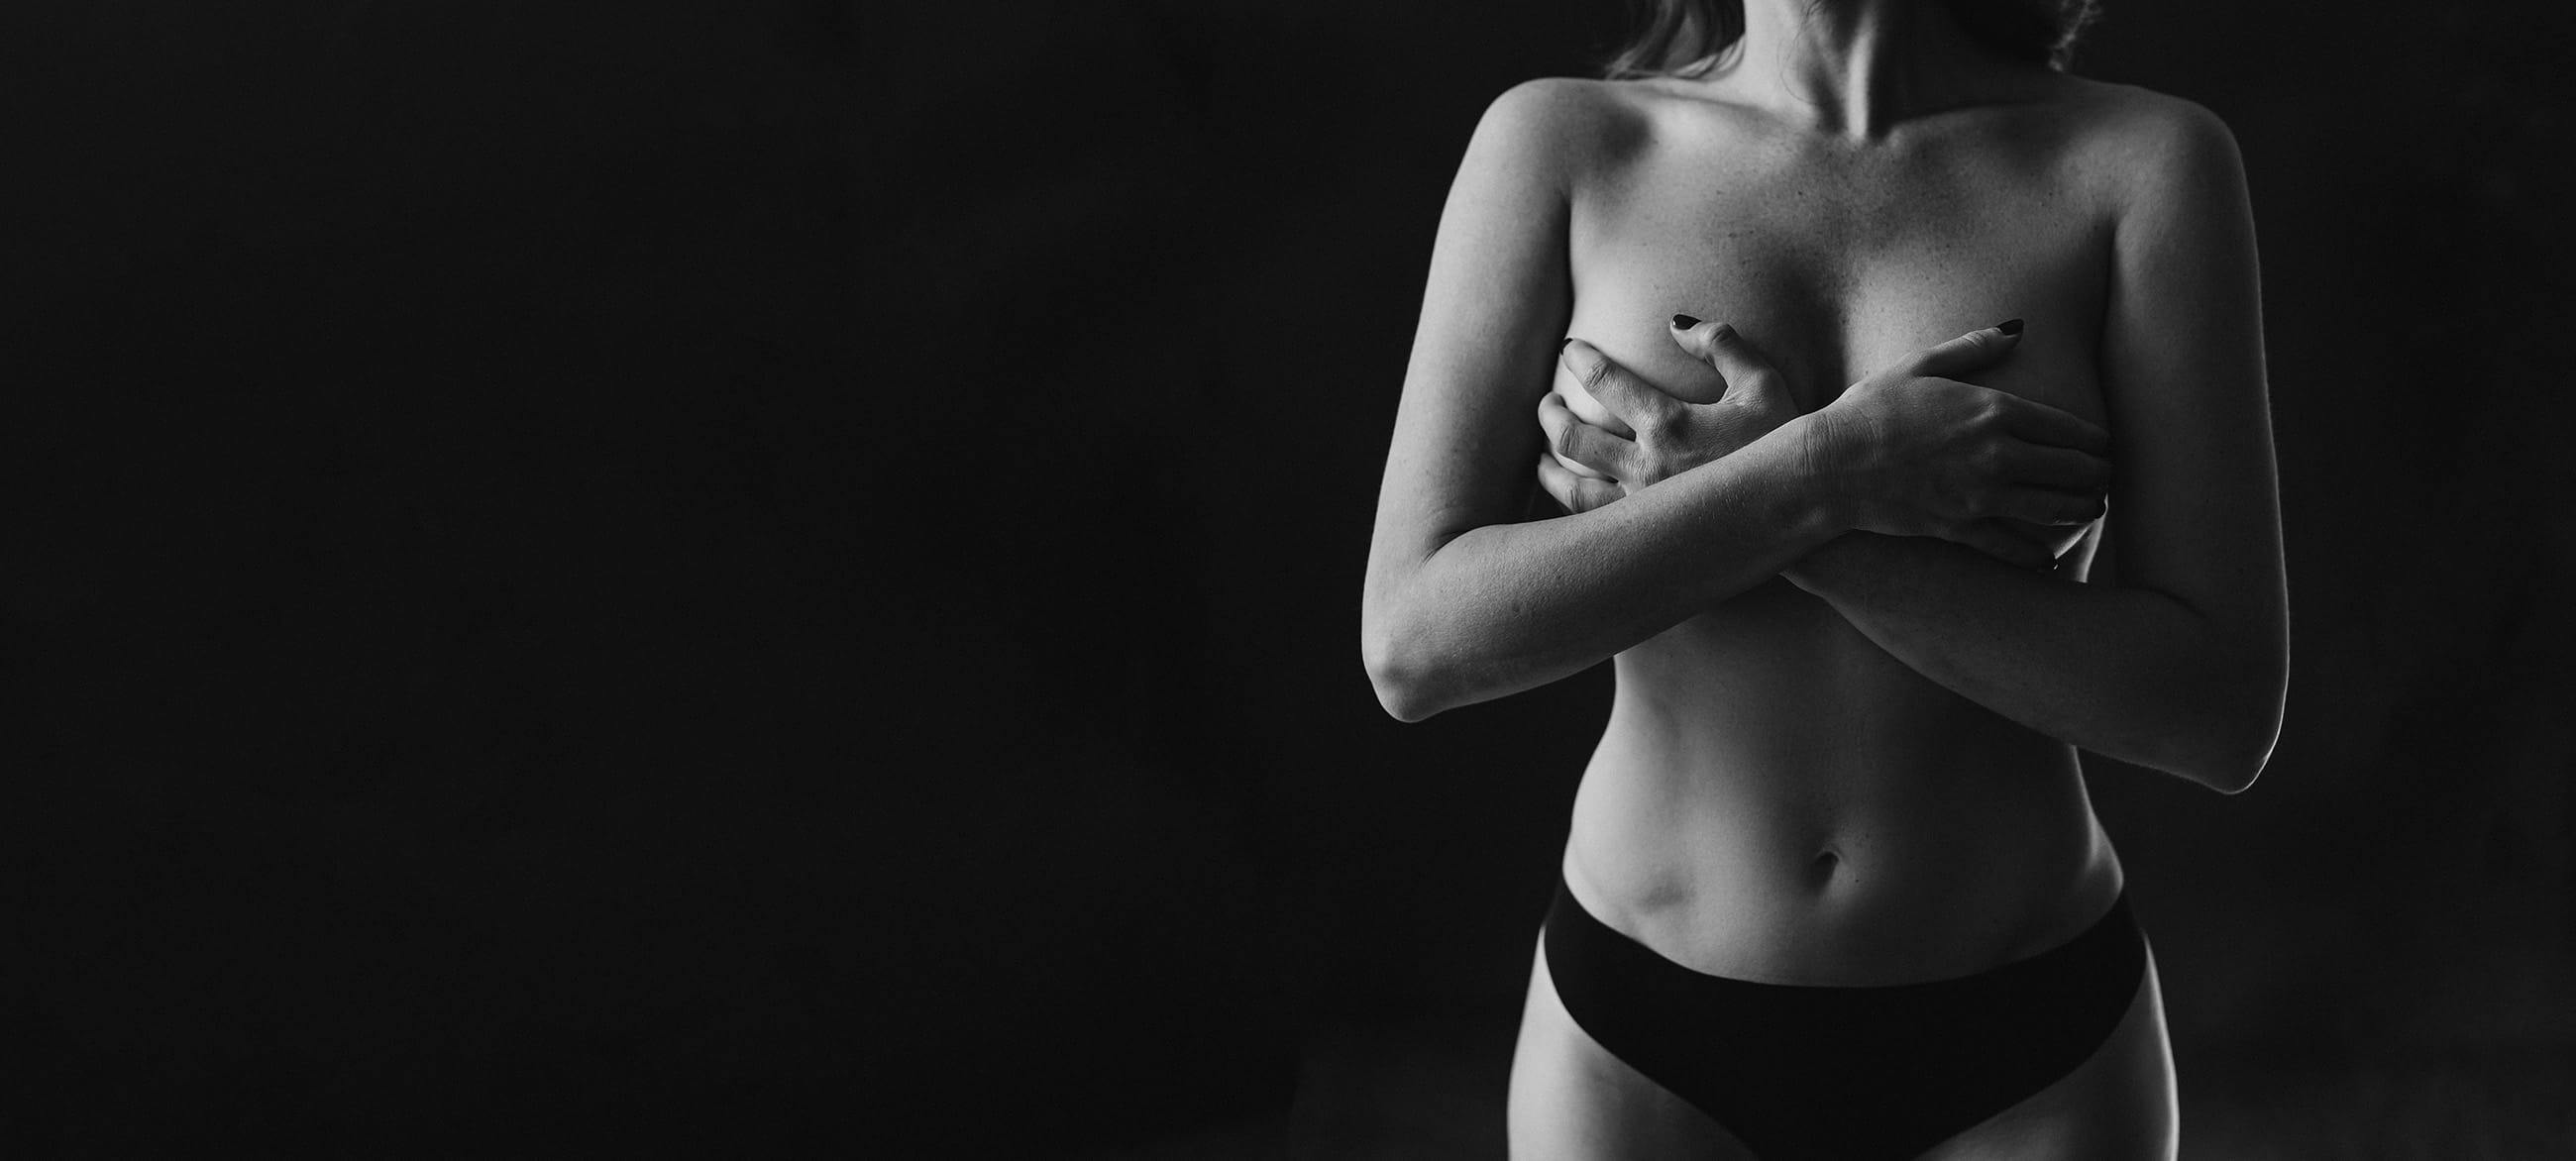 Black and white image of a topless woman covering her breasts with her hands